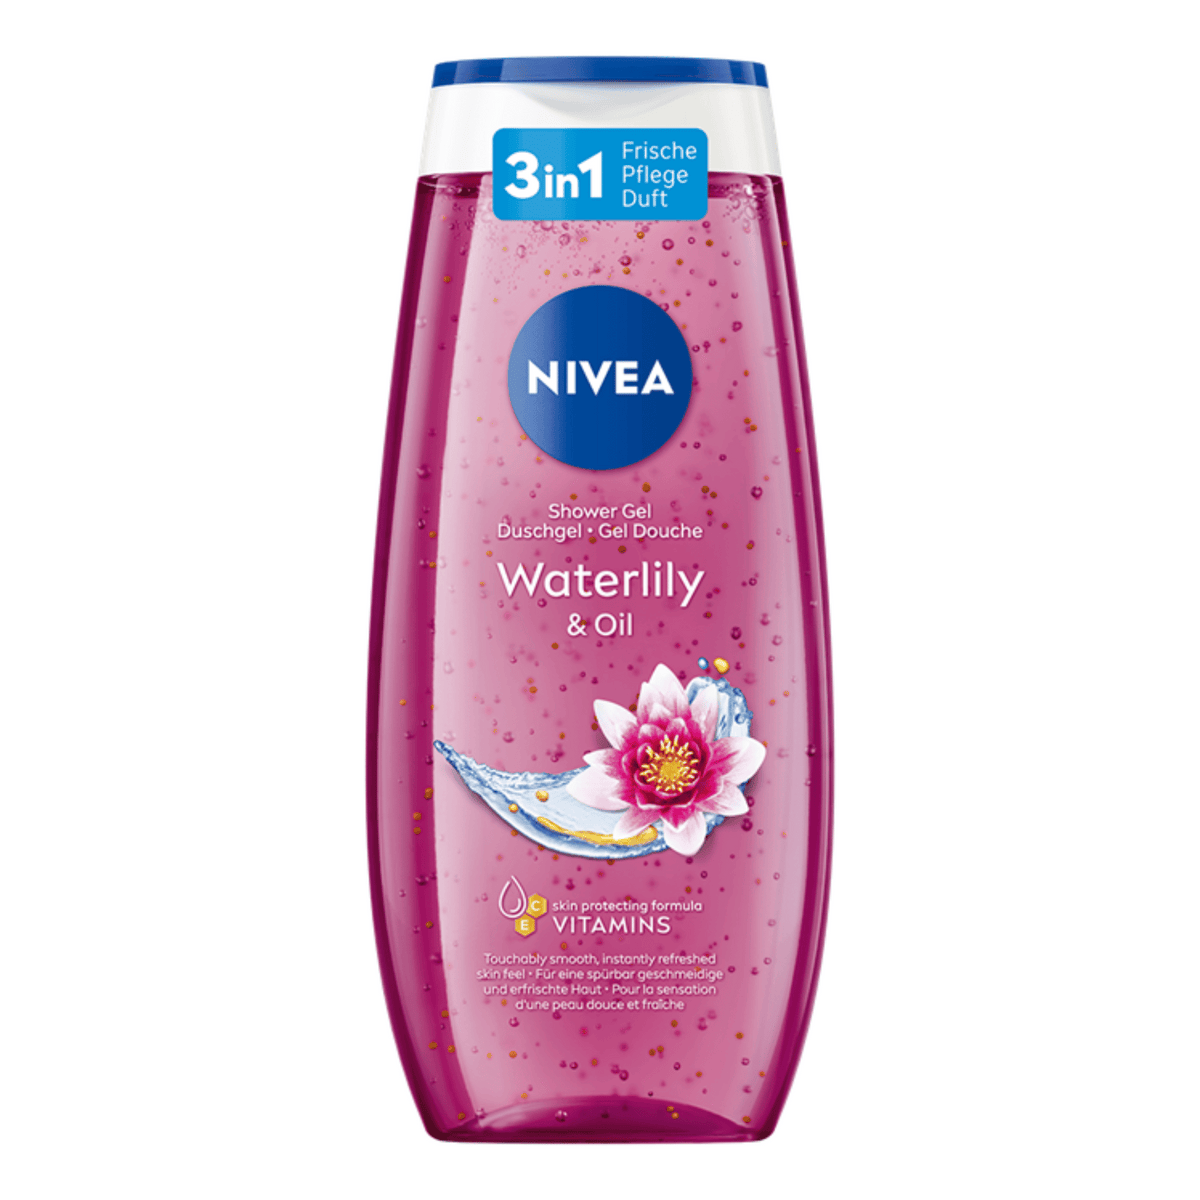 Primary Image of Waterlily and Oil Shower Gel